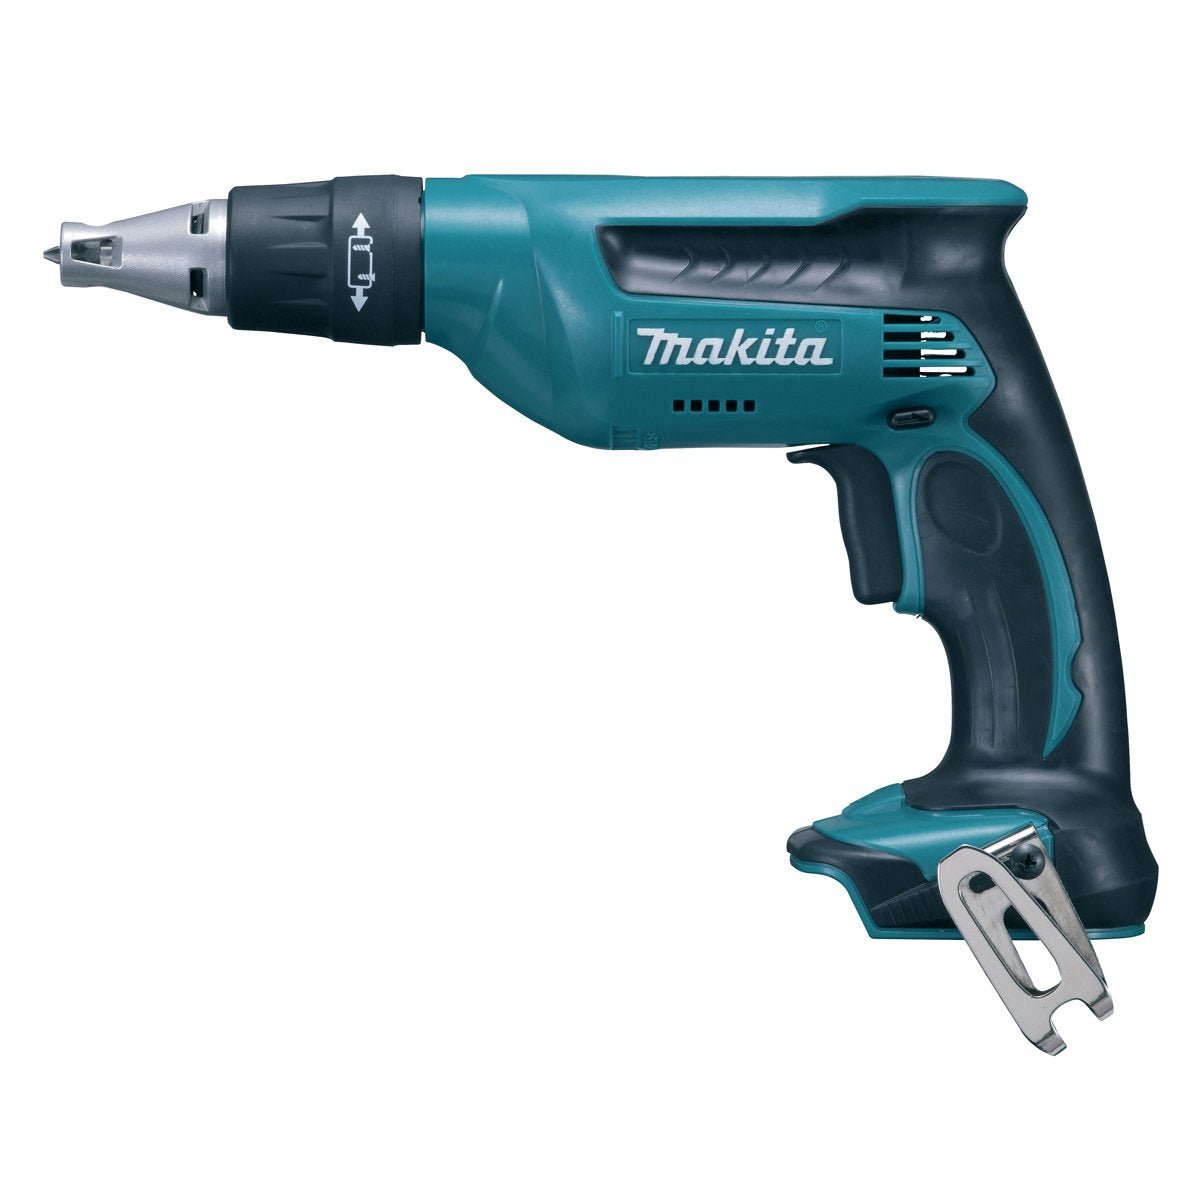 Makita DFS452Z 1/4-Inch Cordless Drywall Screwdriver Kit with Brushless Motor